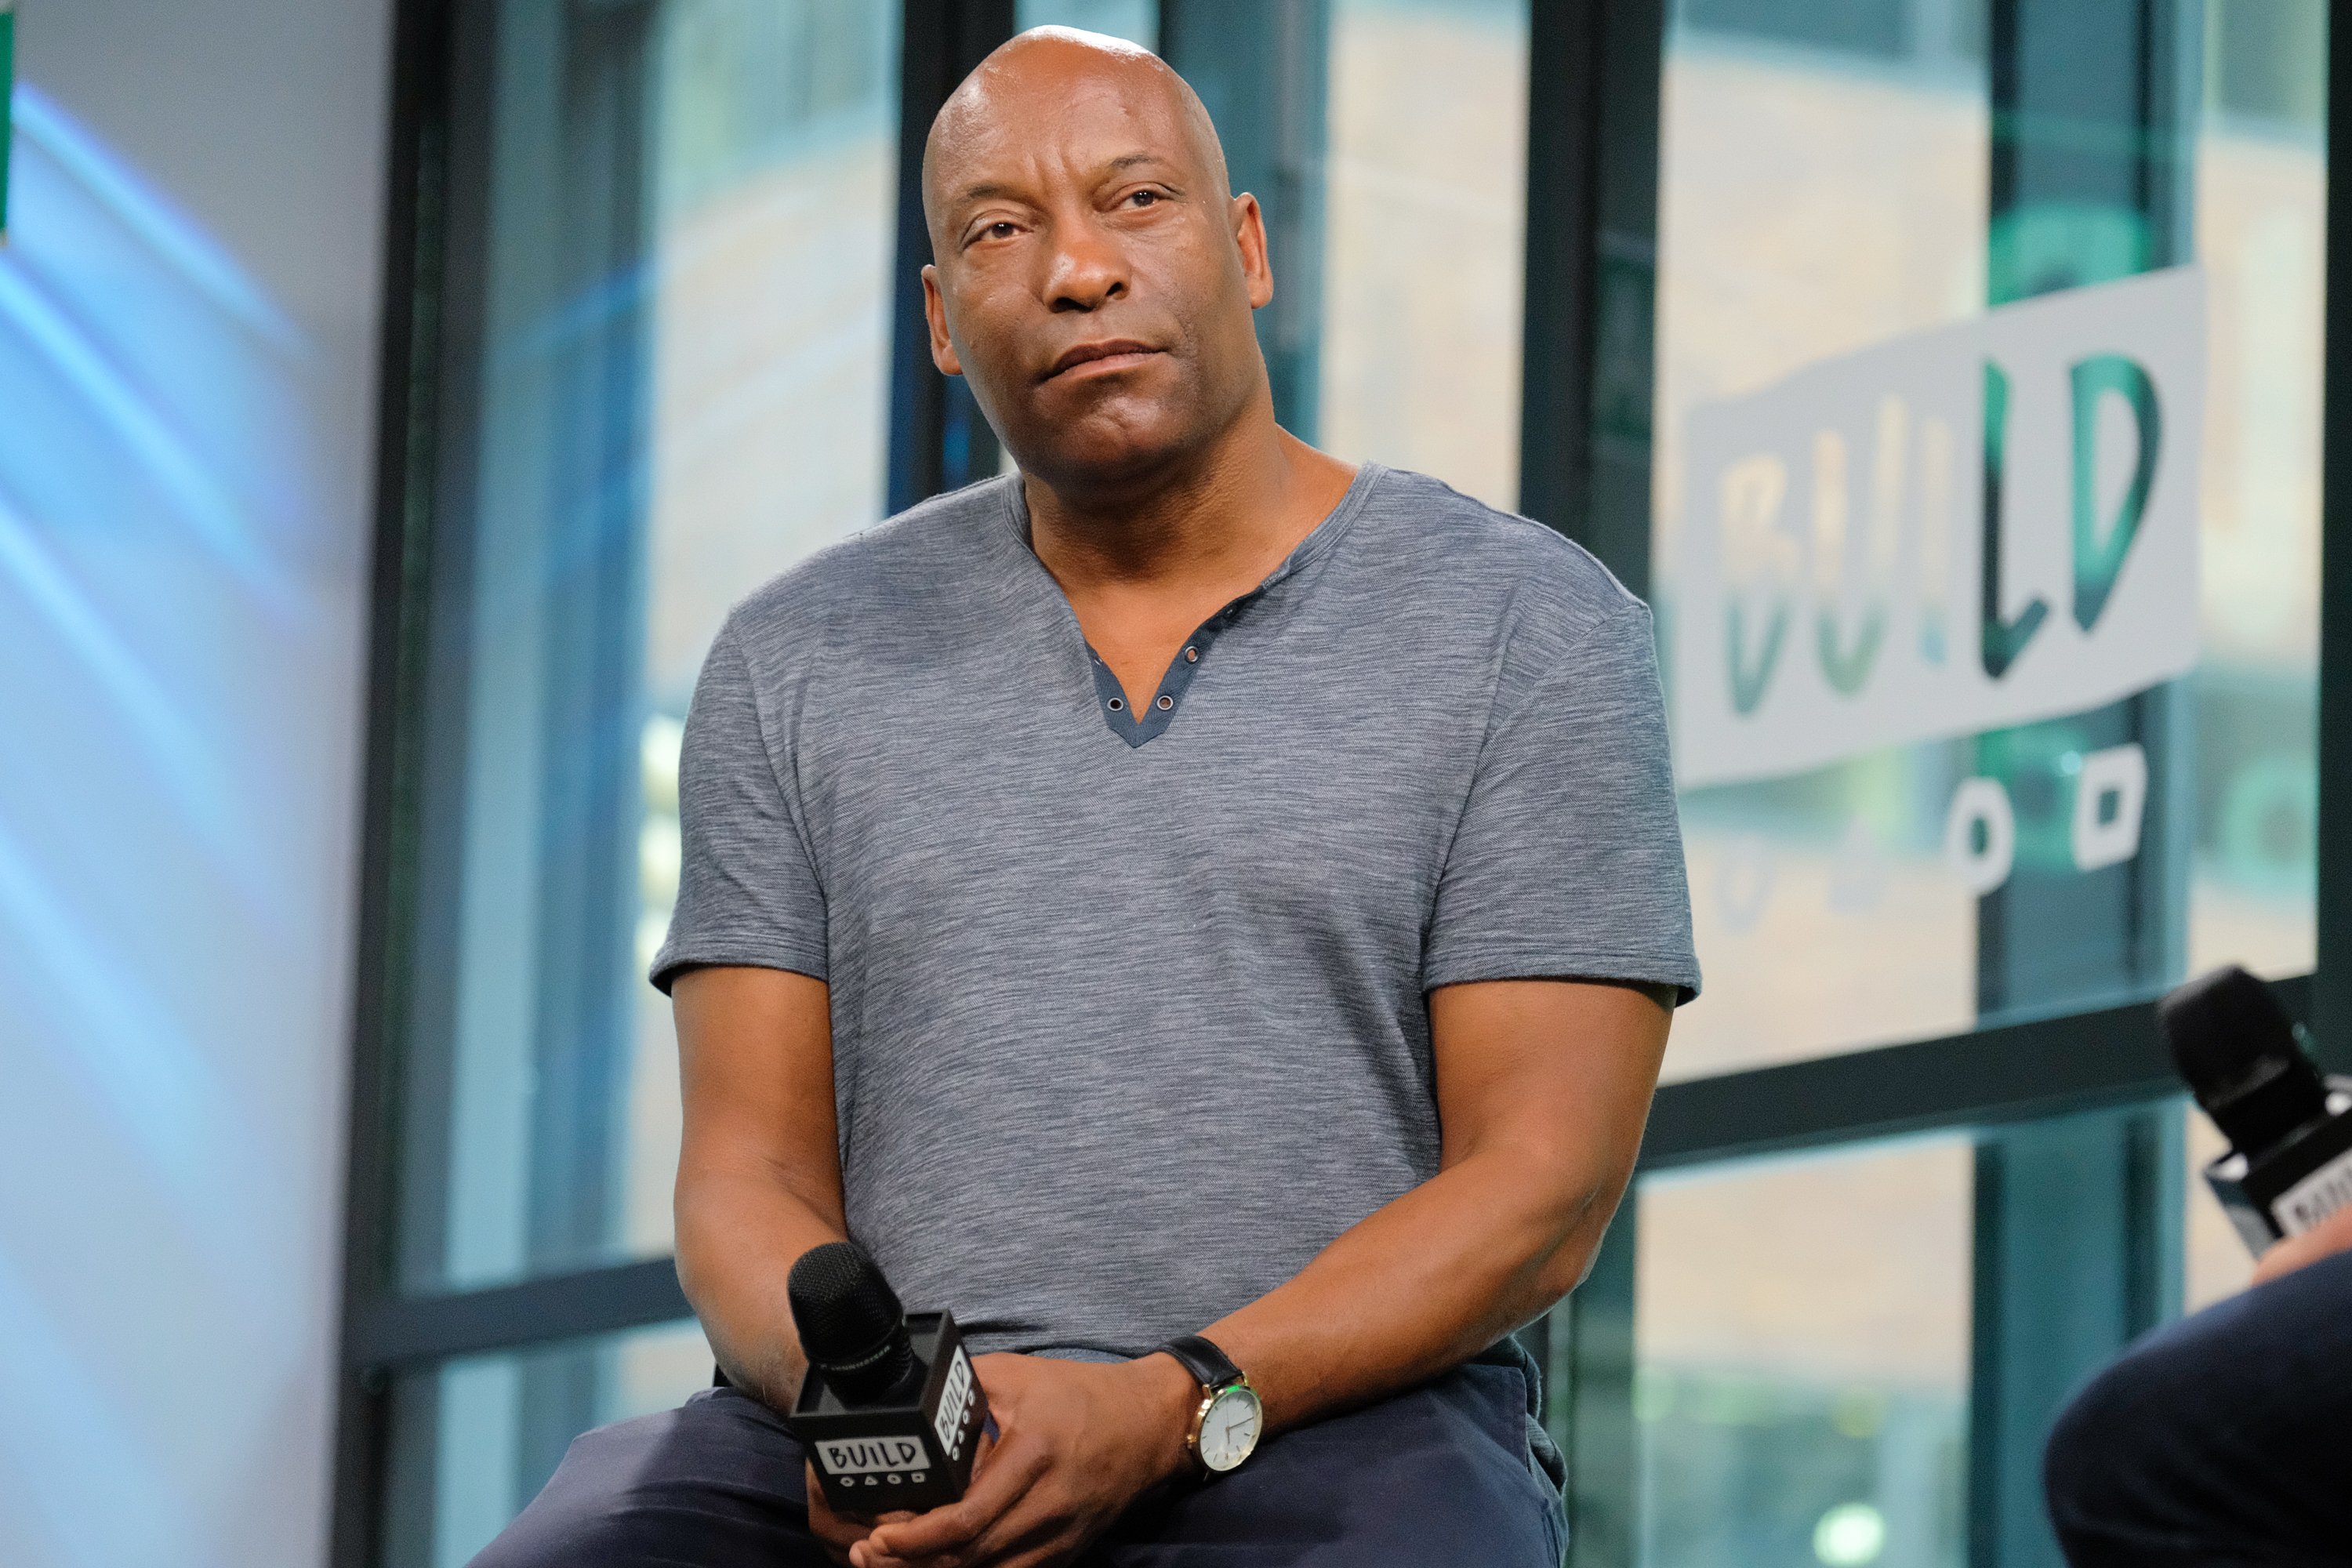  John Singleton at Build Studio on July 20, 2017 in New York City | Photo: Getty Images